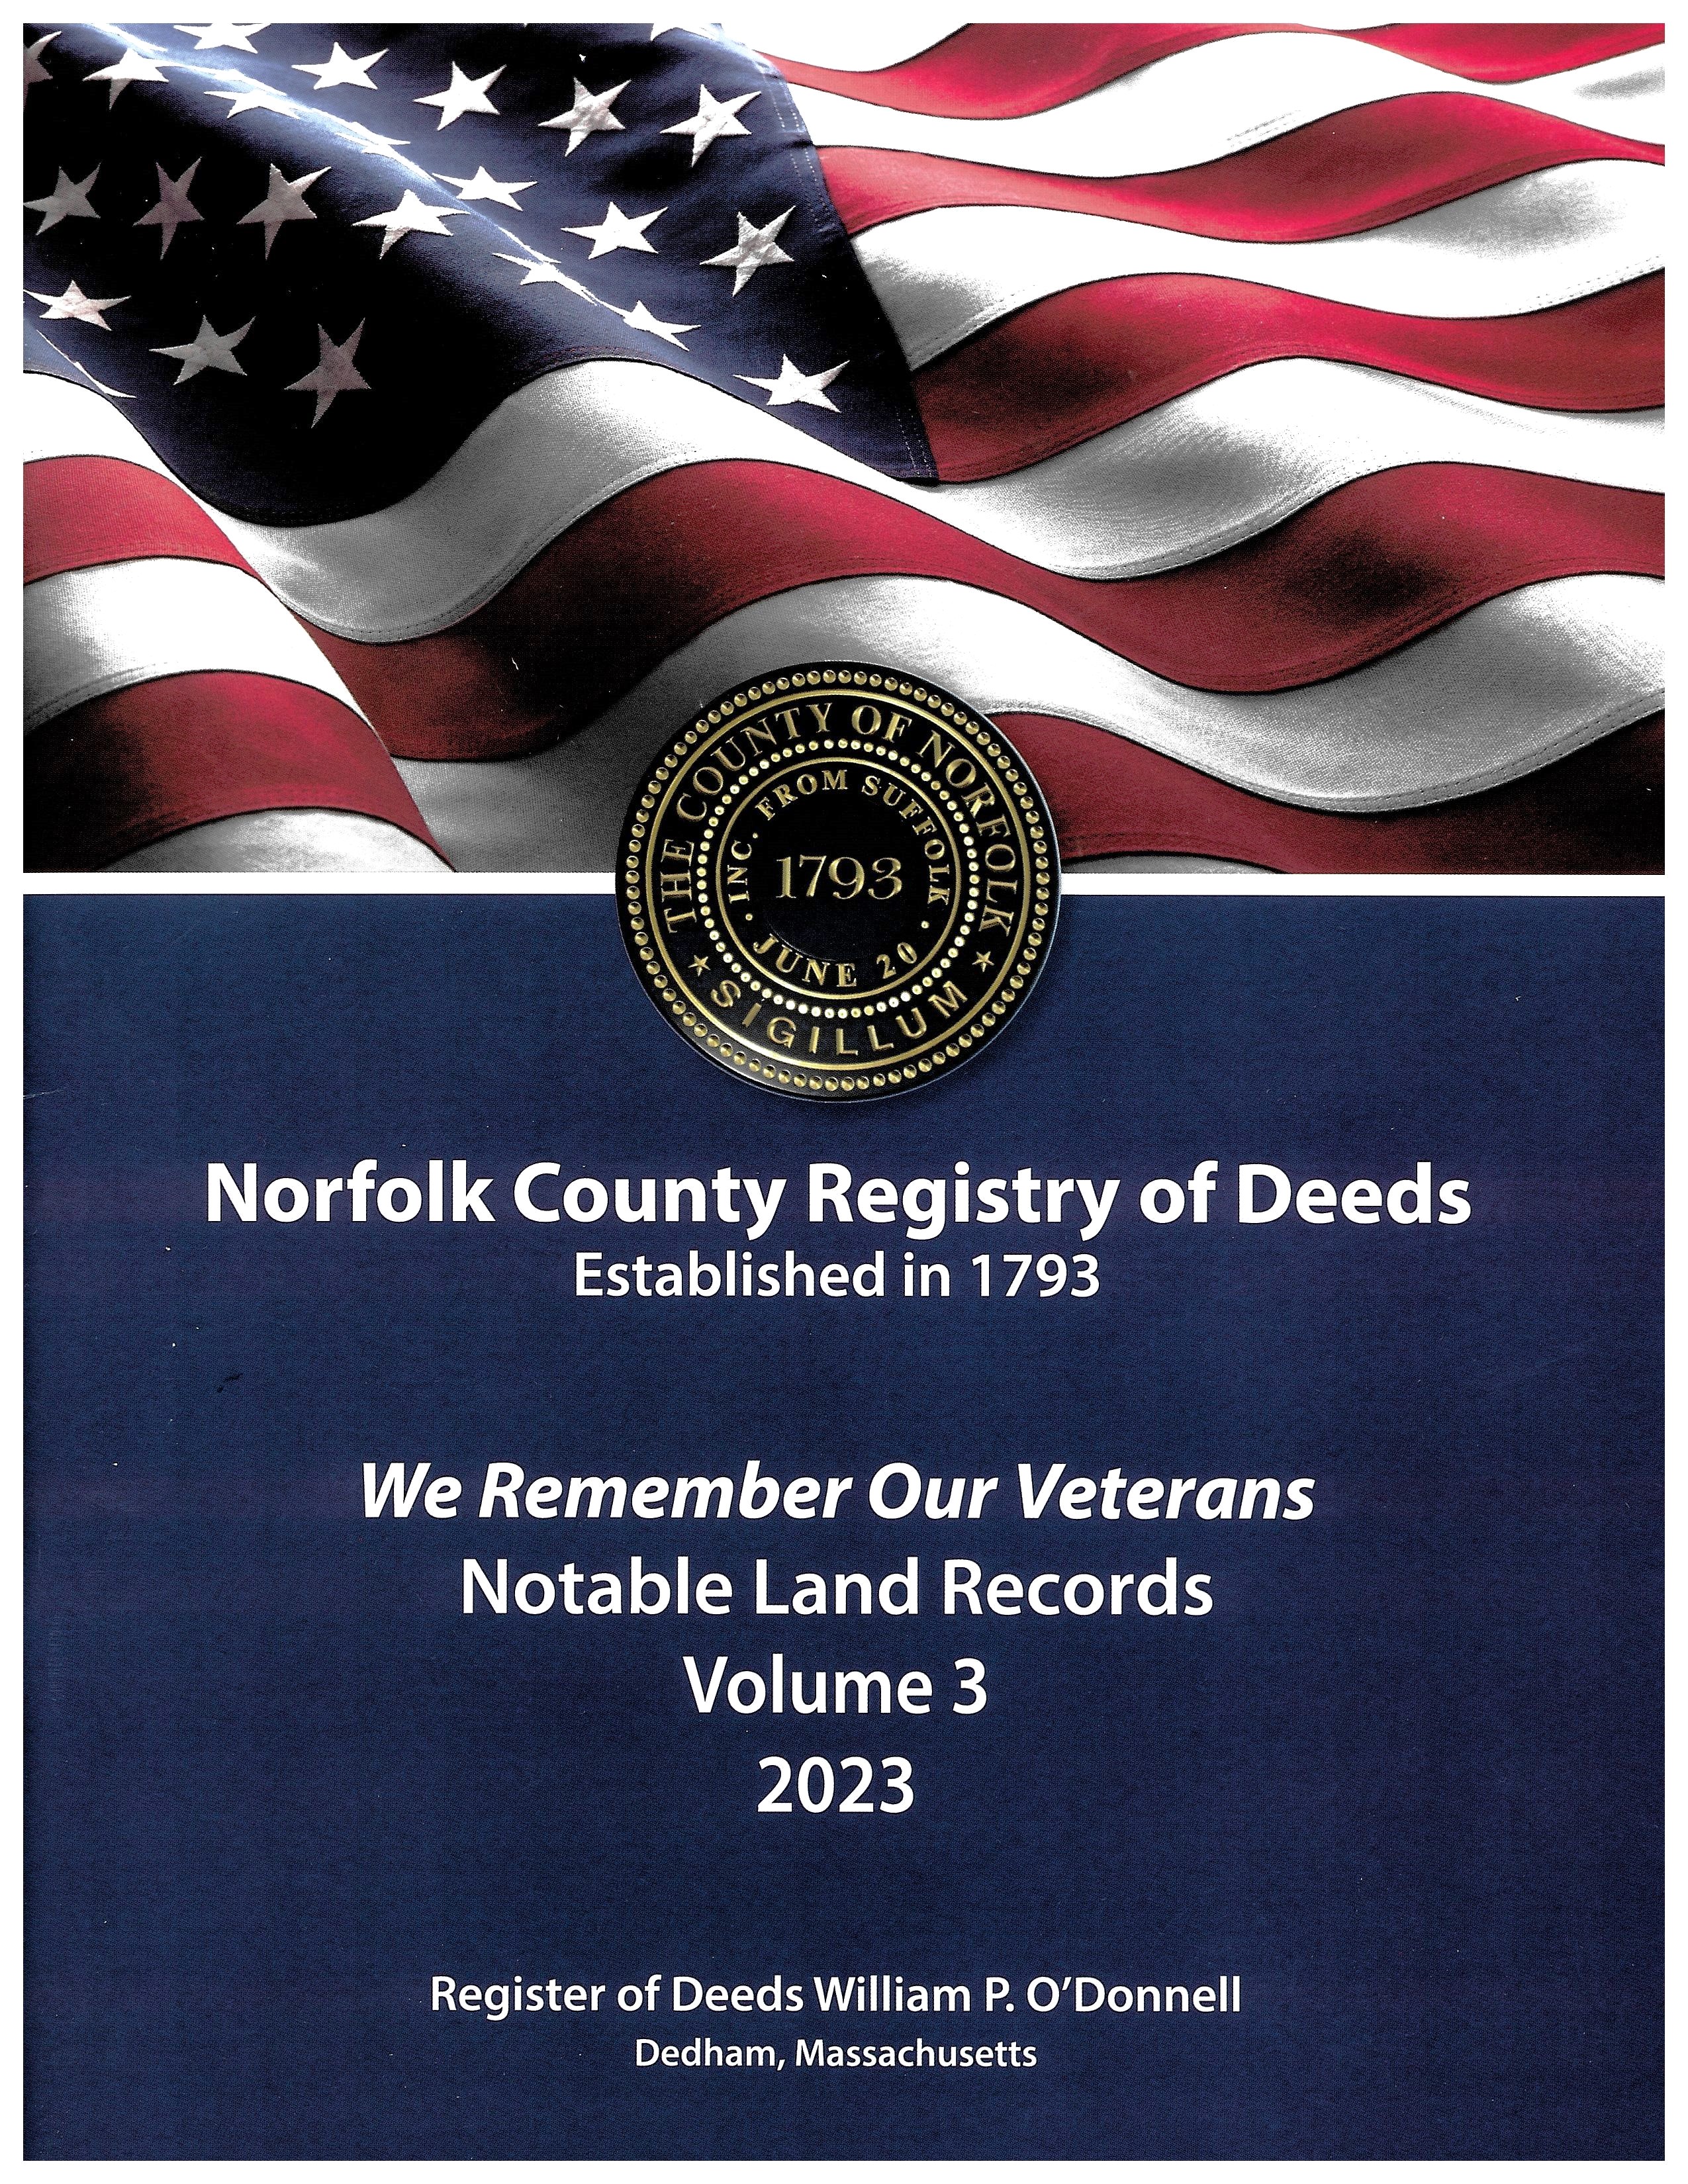 “We Remember Our Veterans” -- Available Online